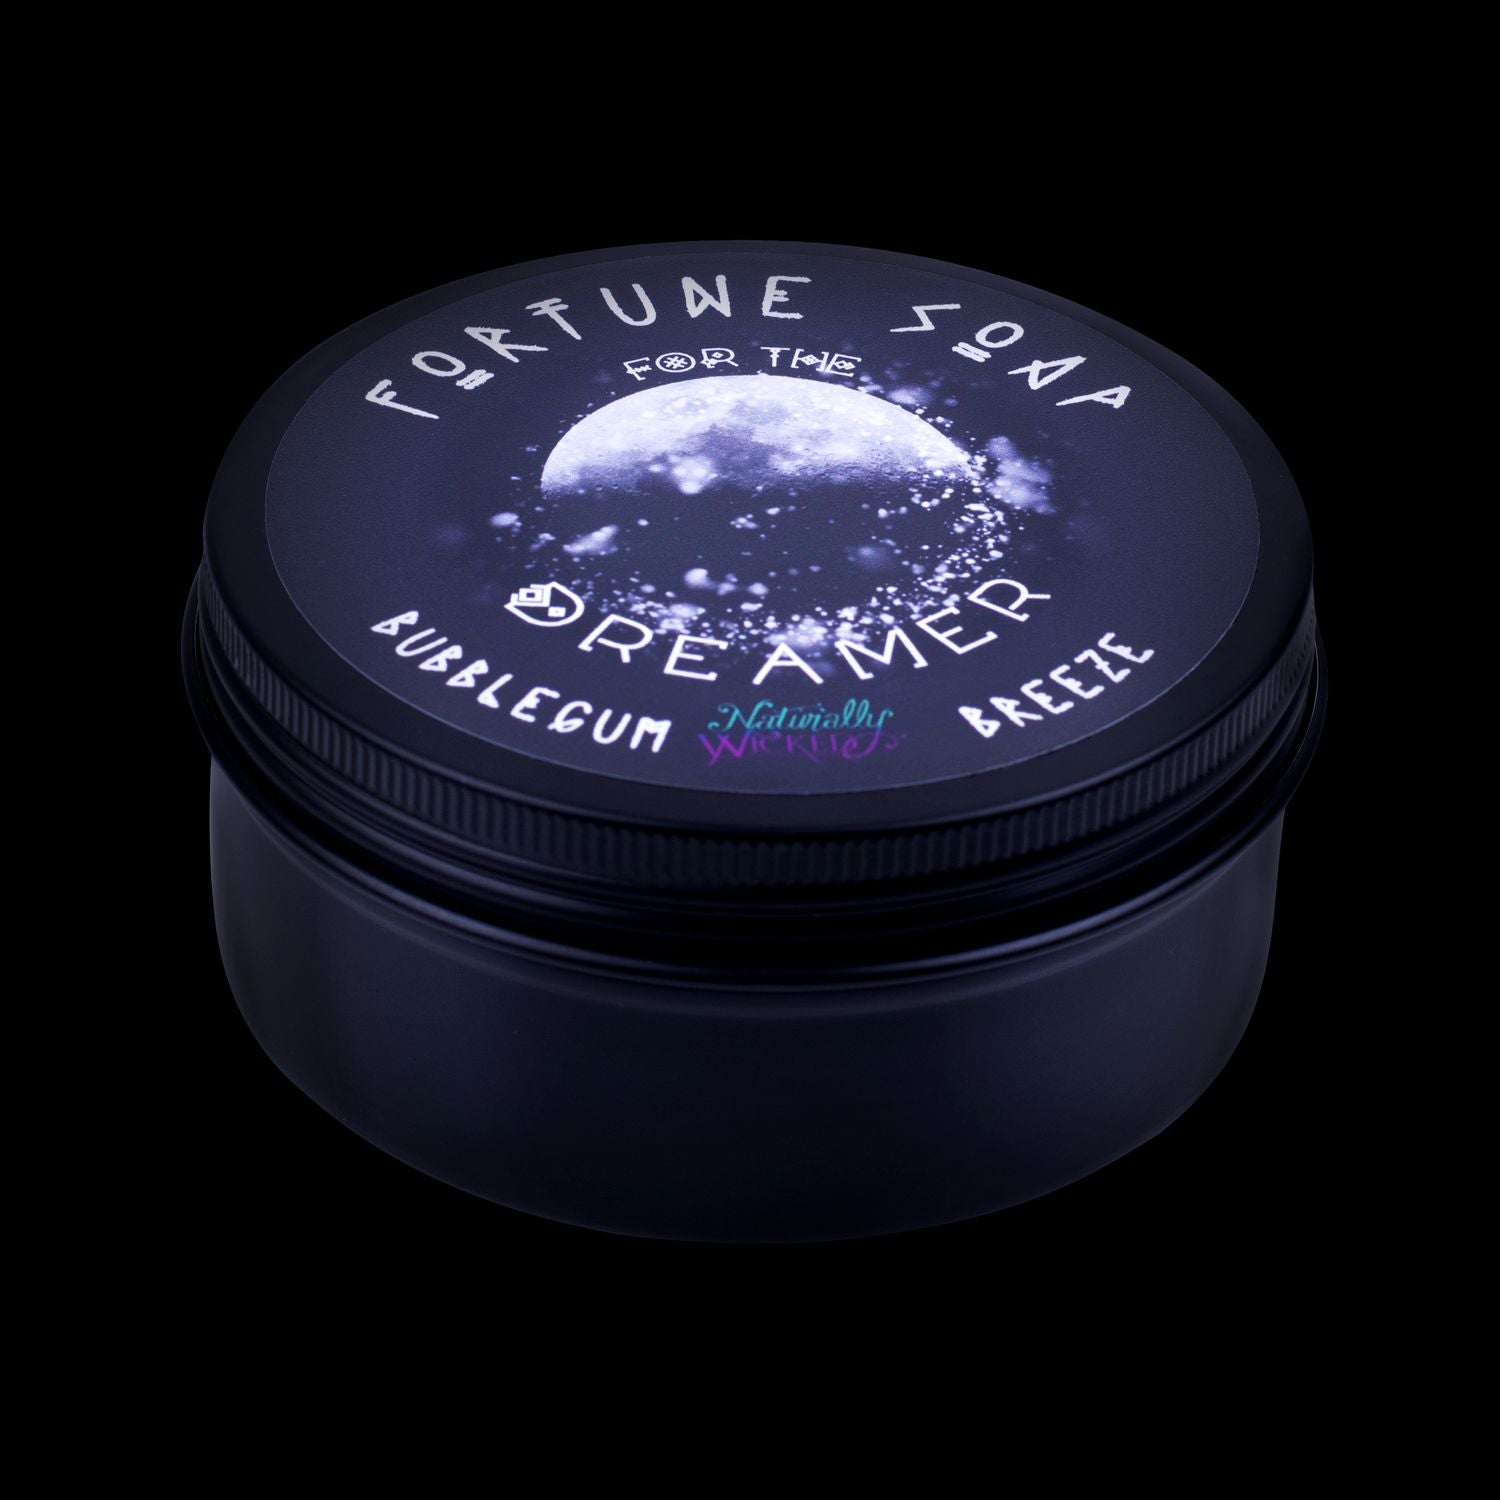 The Perfect Gift For A Dreamer. Naturally Wicked Fortune Soap For The Dreamer. Black Gloss Gift Tin Included